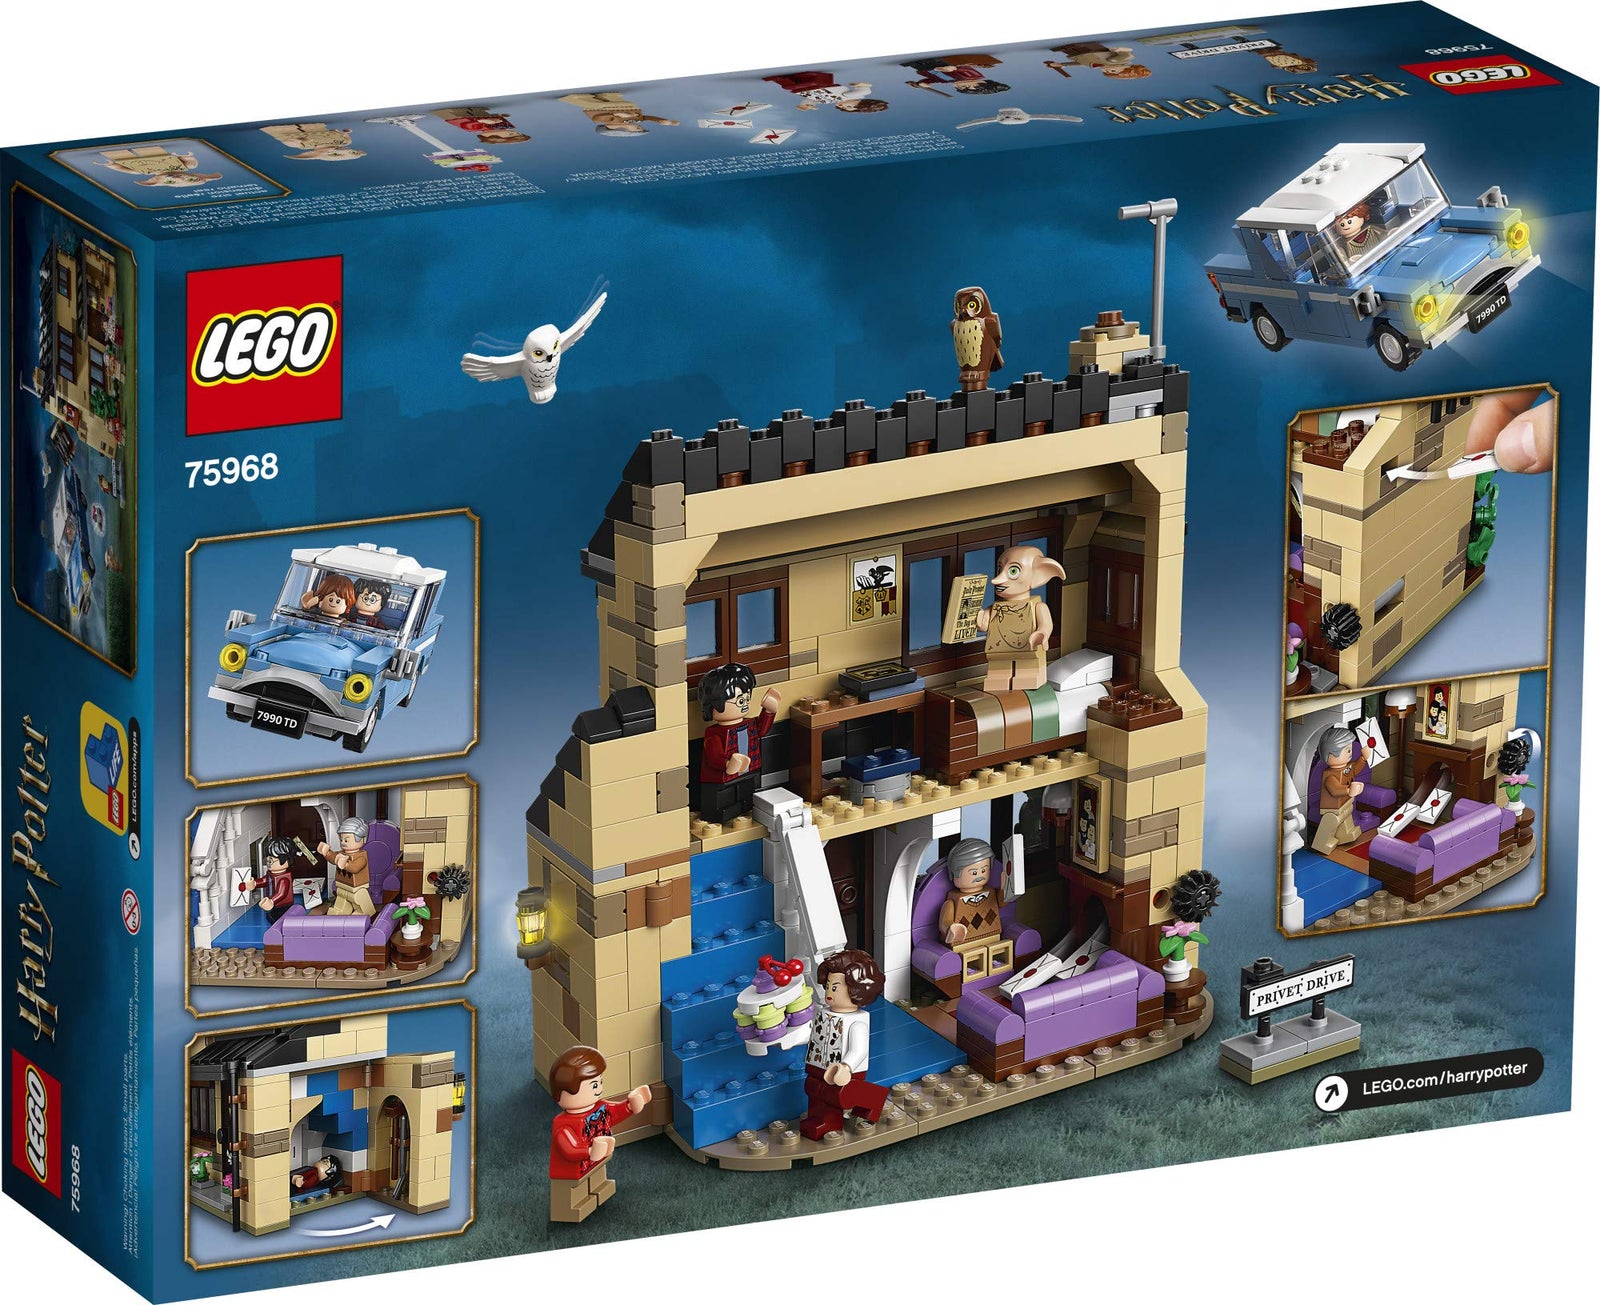 LEGO Harry Potter 4 Privet Drive 75968; Fun Children’s Building Toy for Kids Who Love Harry Potter Movies, Collectible Playsets, Role-Playing Games and Dollhouse Sets (797 Pieces)